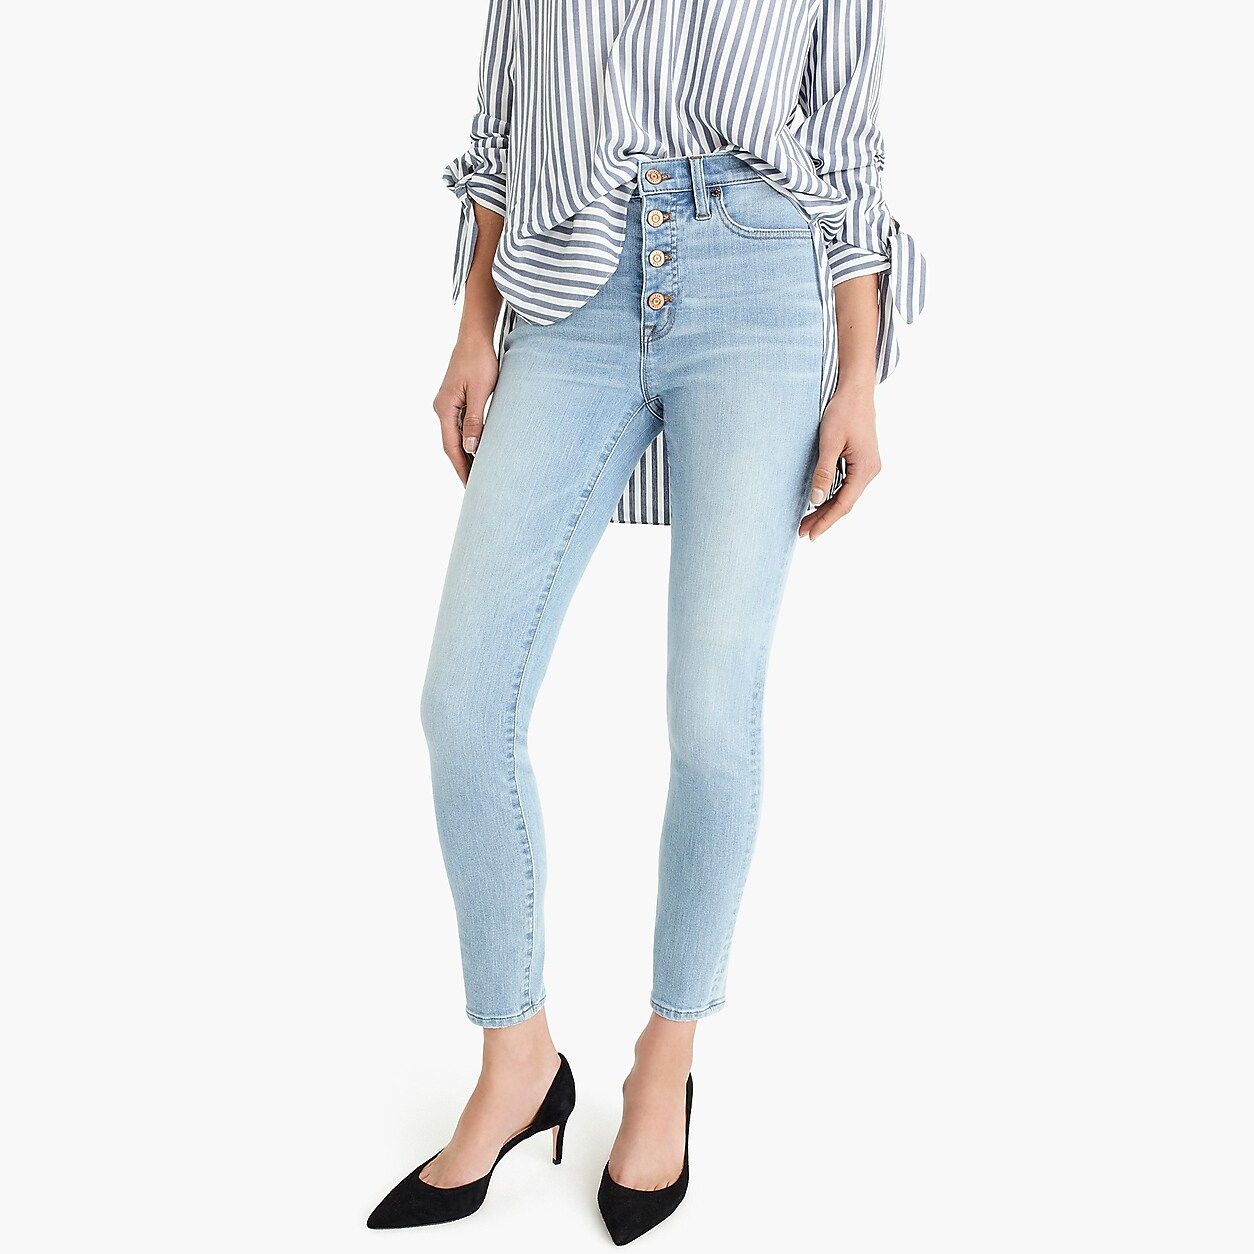 9" high-rise toothpick jean in Leddy wash with button fly | J.Crew UK